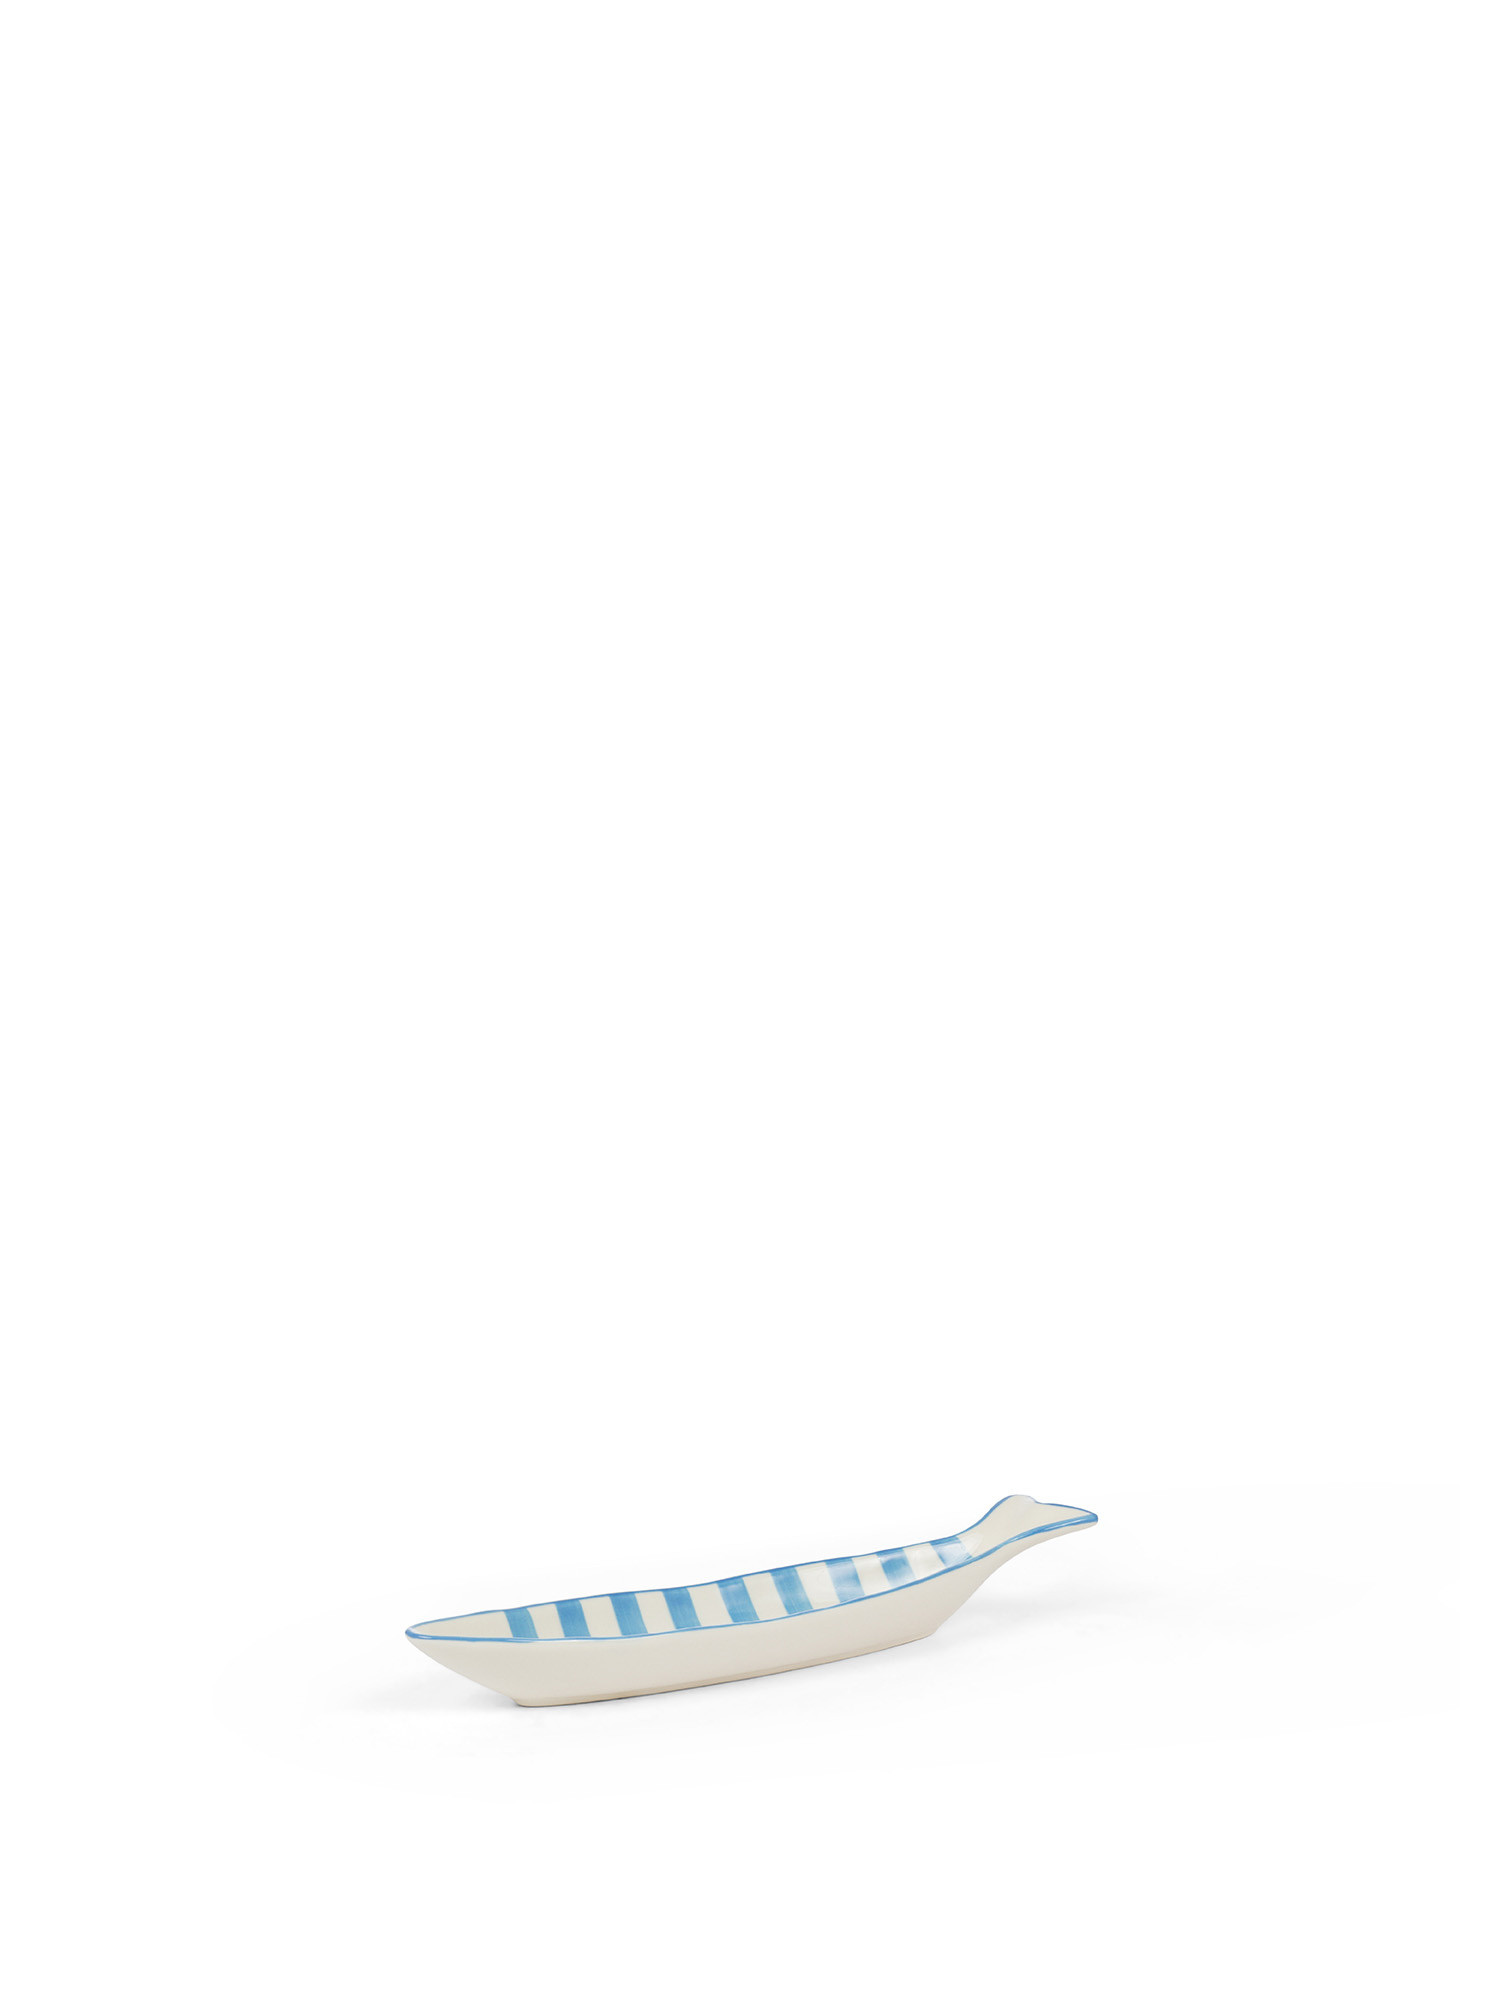 Stoneware fish cup, White / Blue, large image number 0